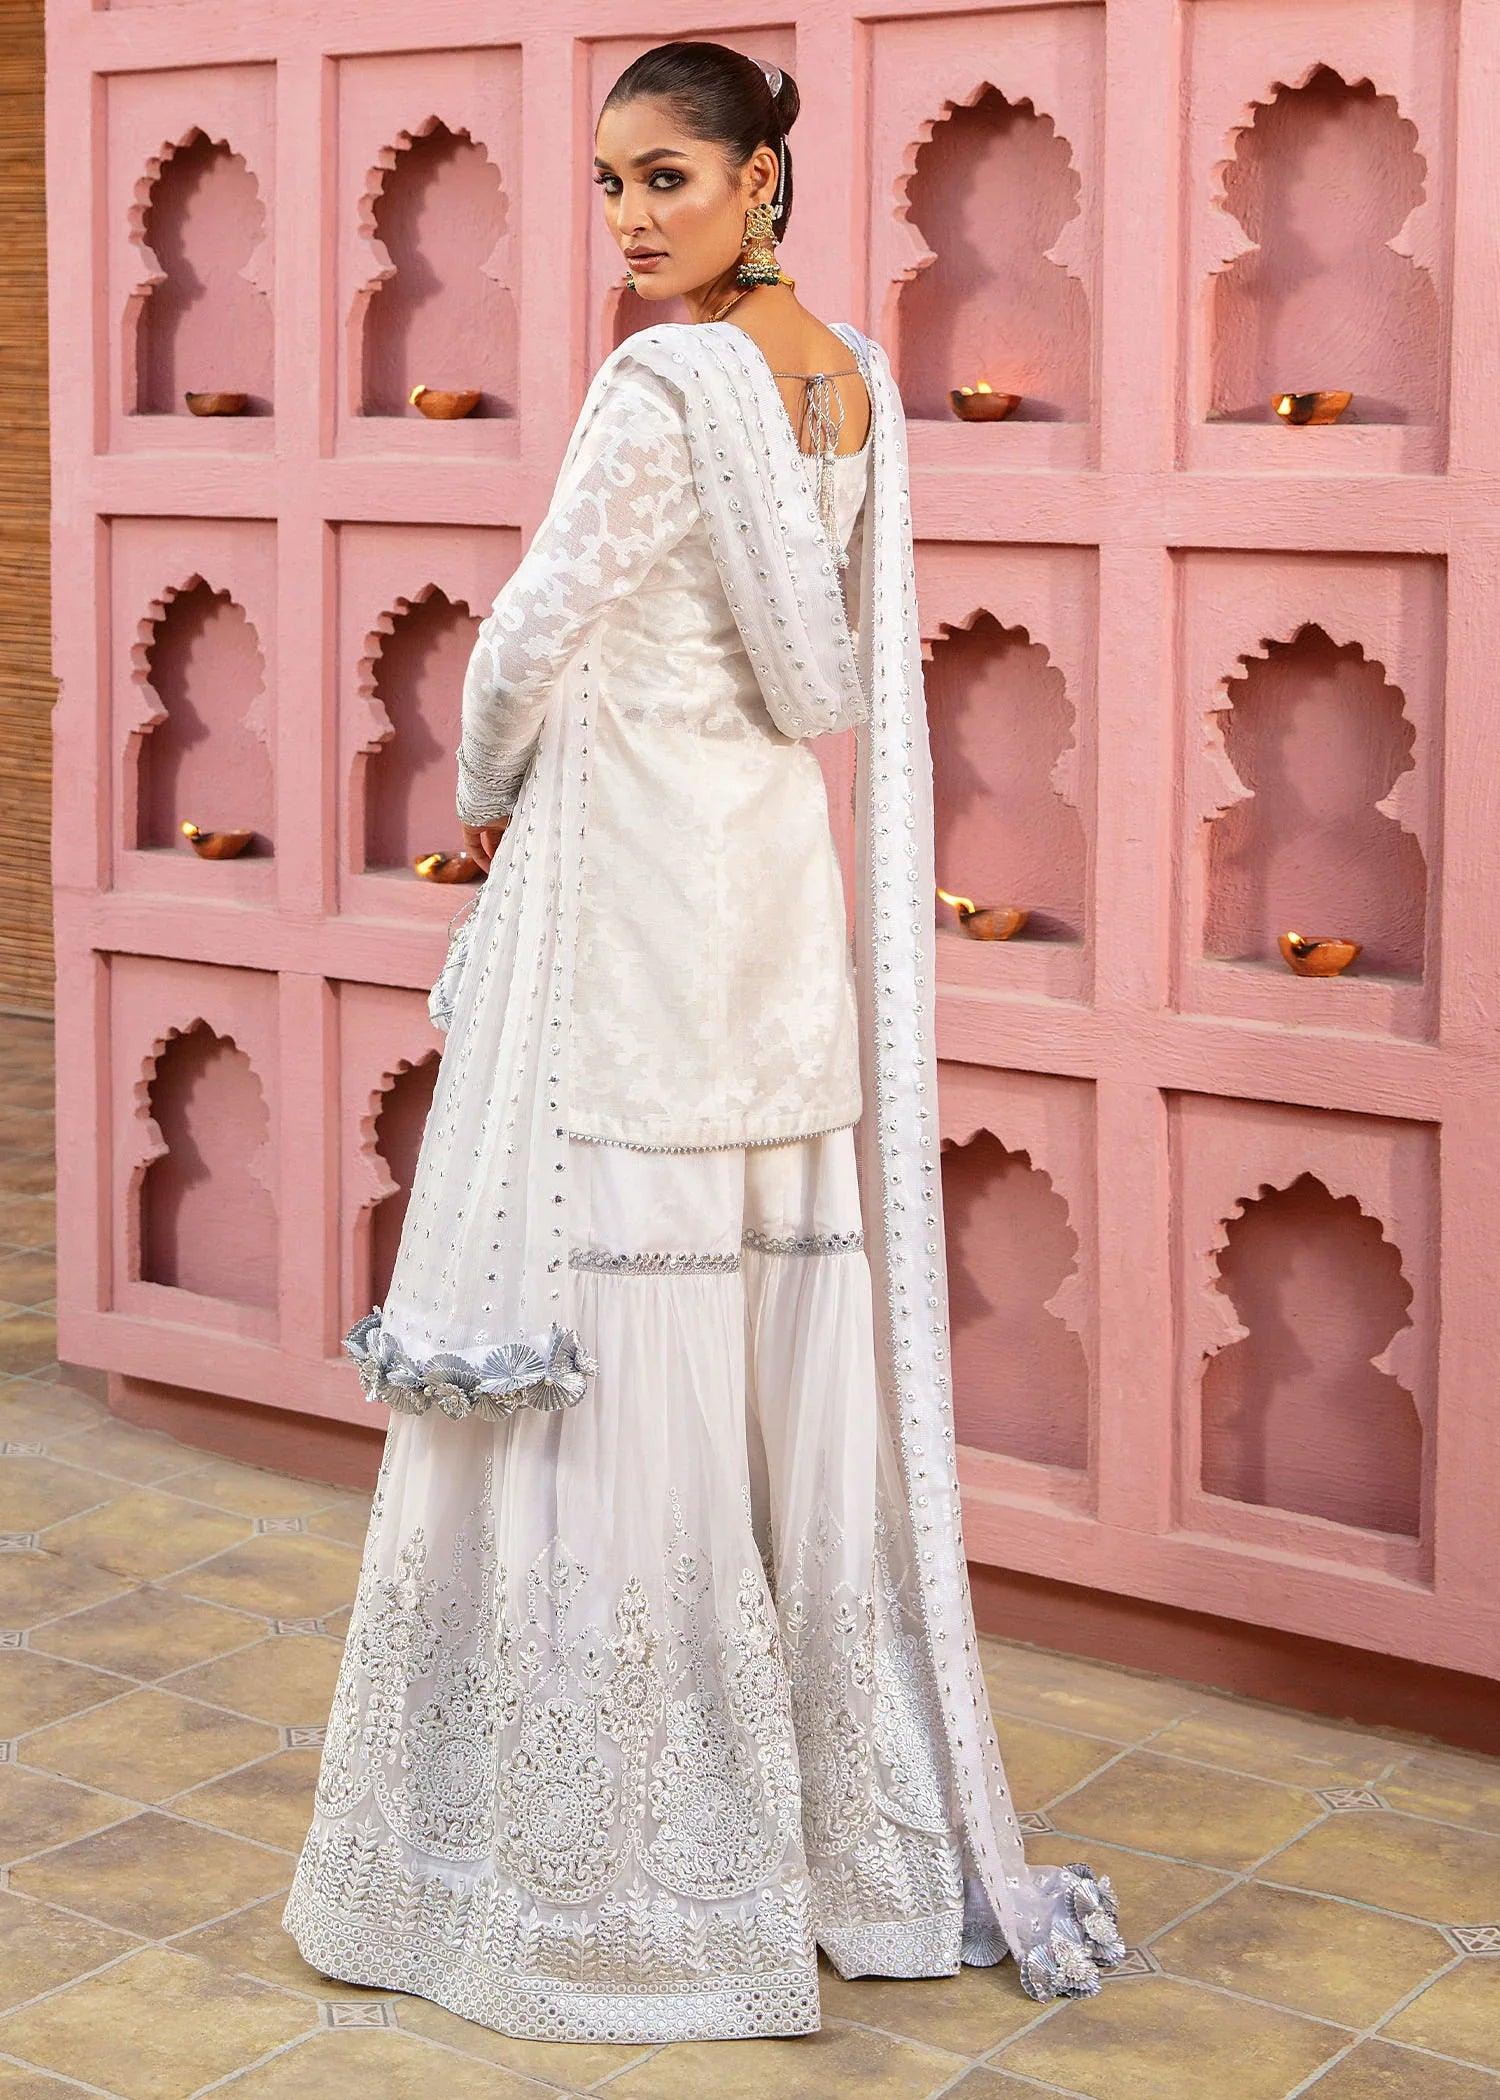 Chandni Nur-e-Subh by Nilofer Shahid Wedding Collection unstitched 3 Pieces